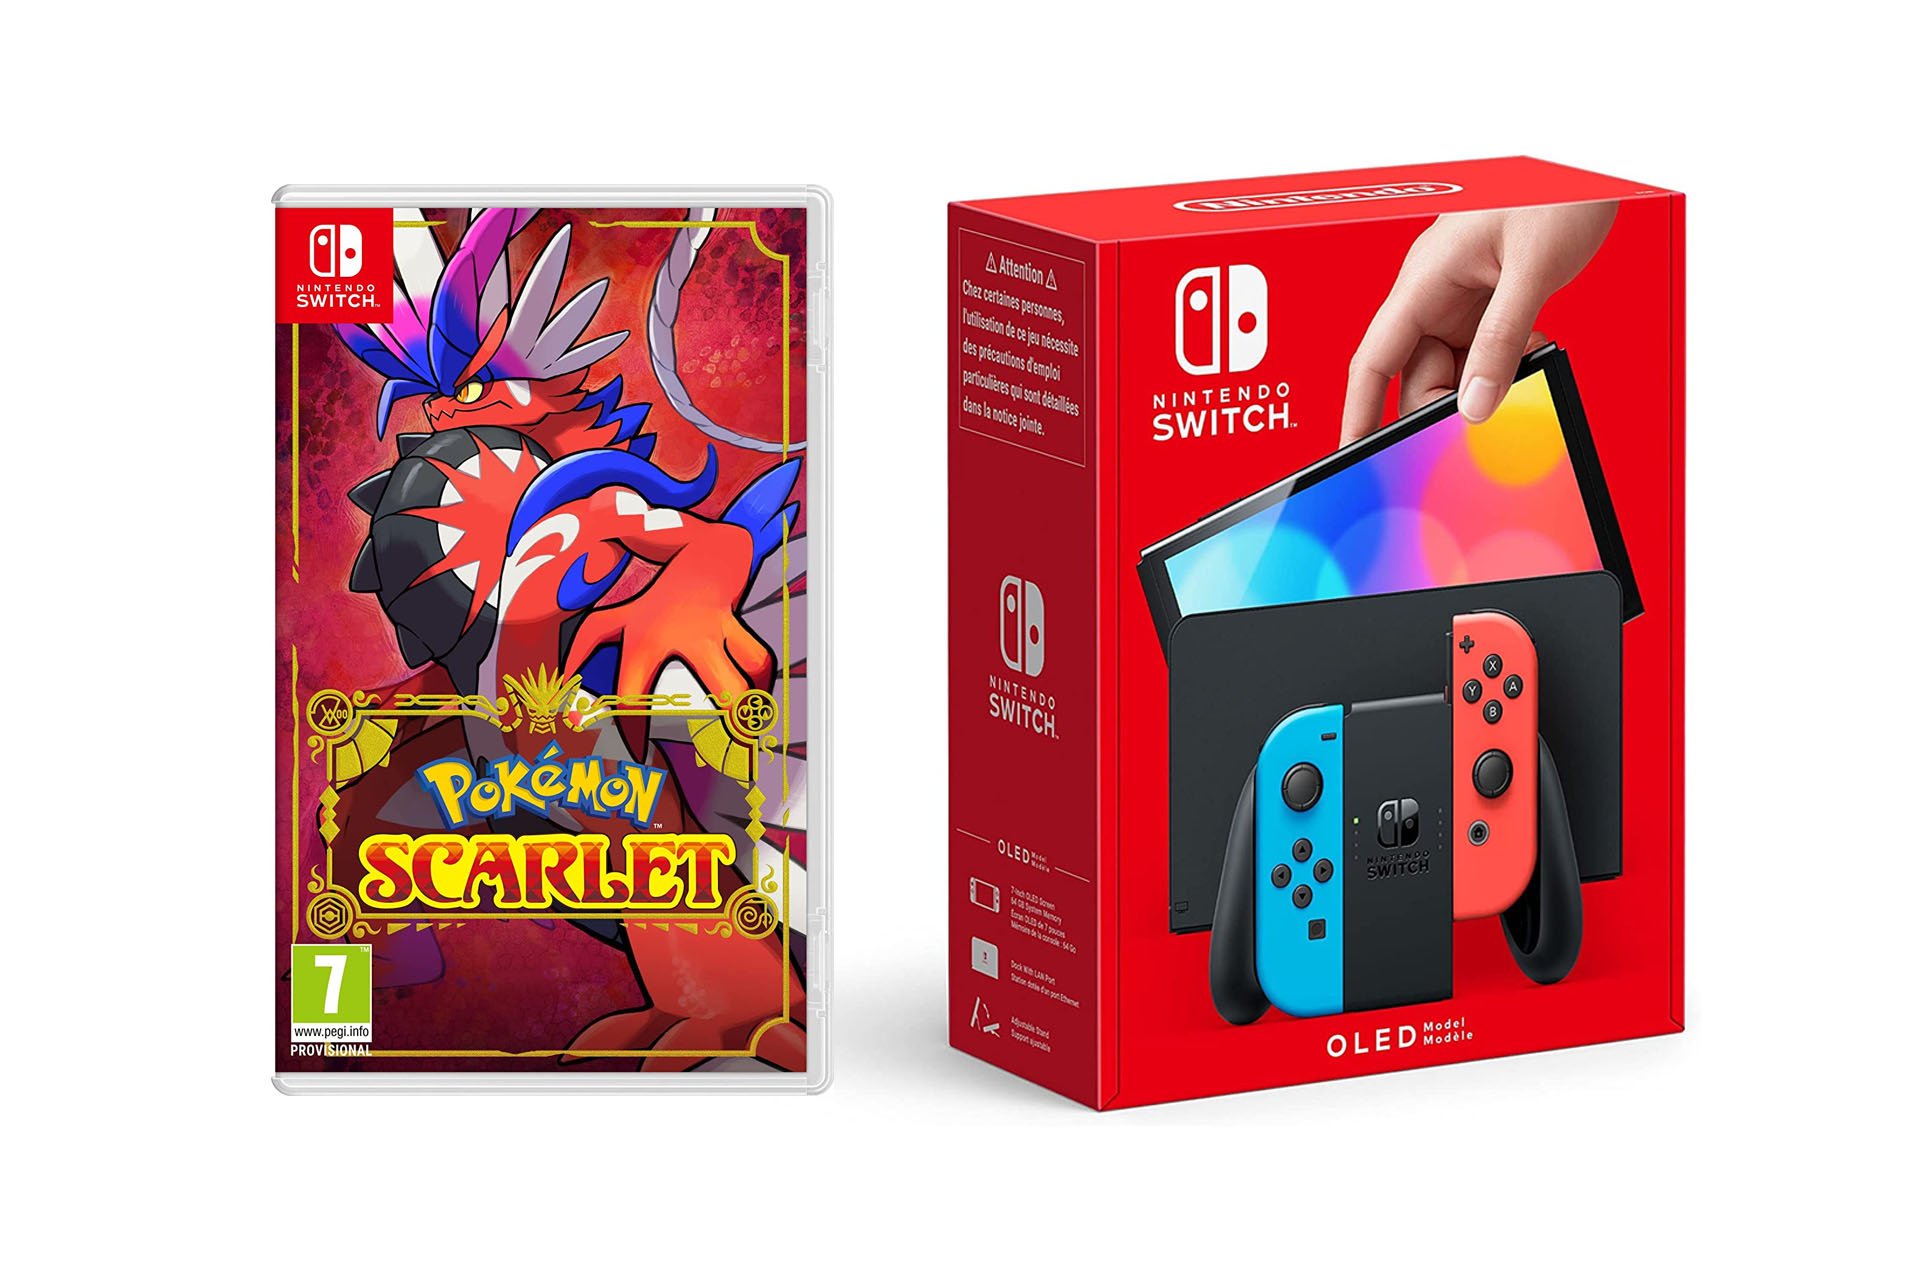 Product shots of Pokemon Scarlet and the Nintendo Switch OLED console